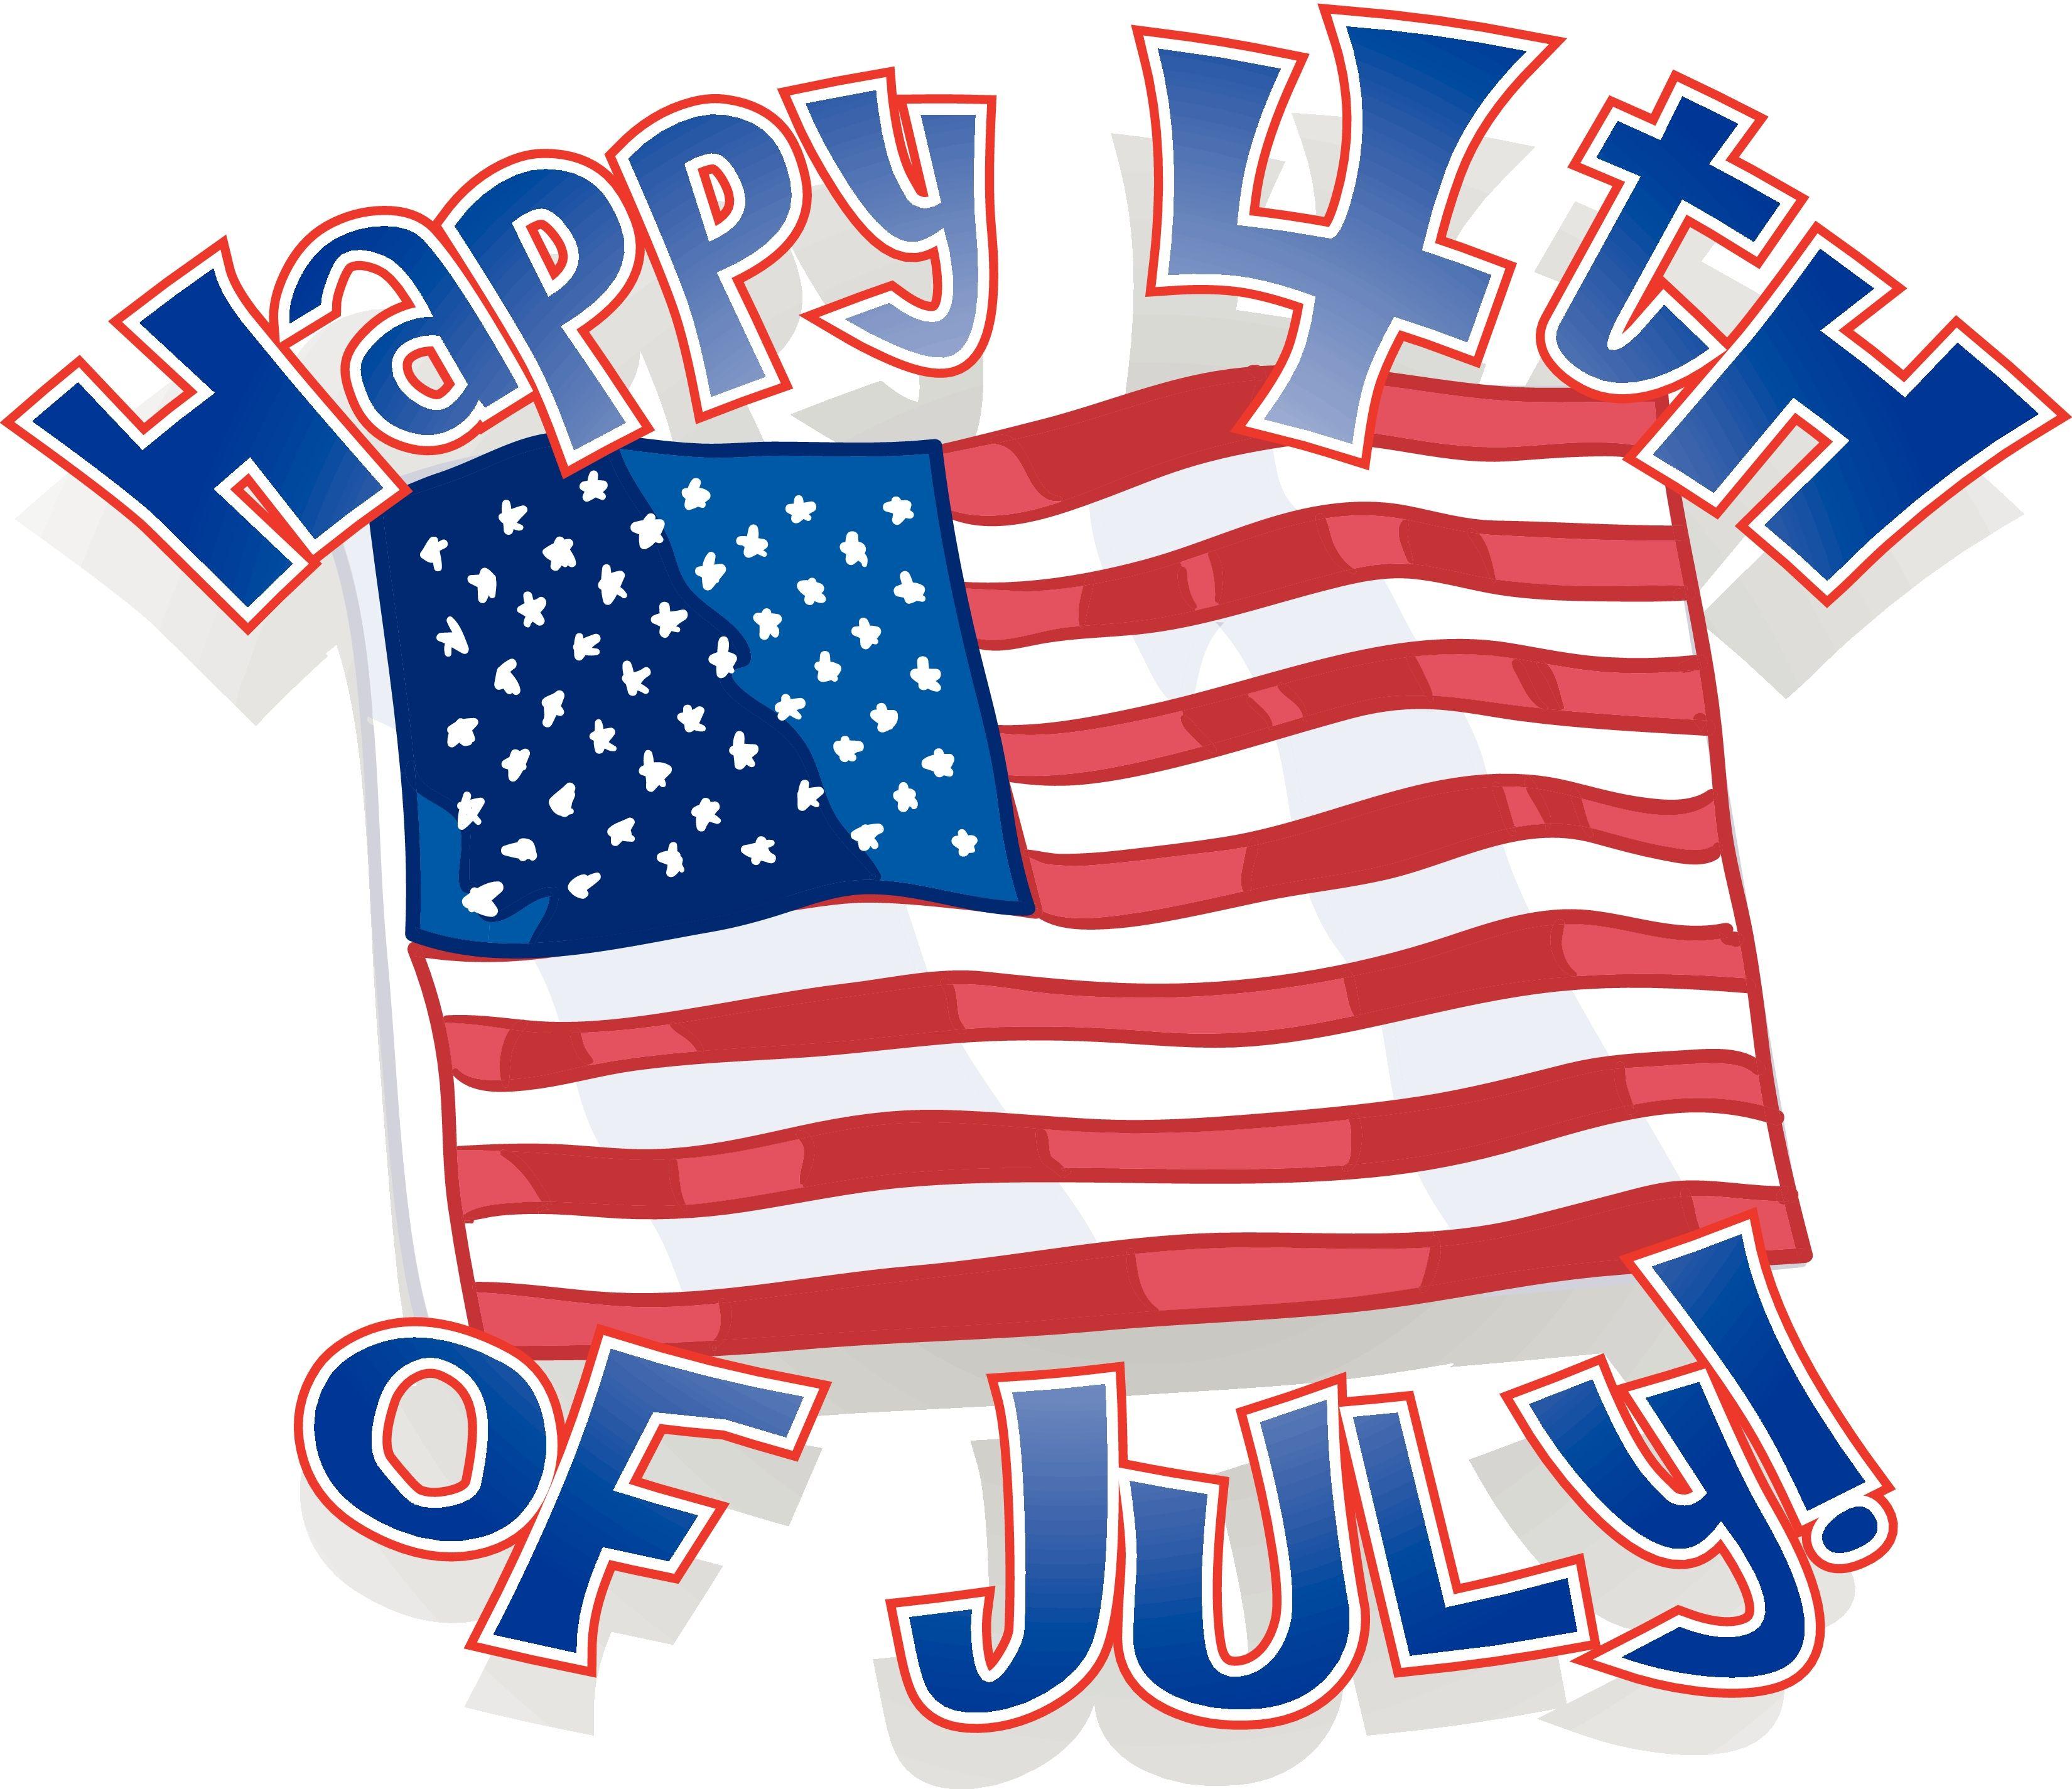 Happy 4th Of July 2018 Image Quotes Picture Wishes Messages